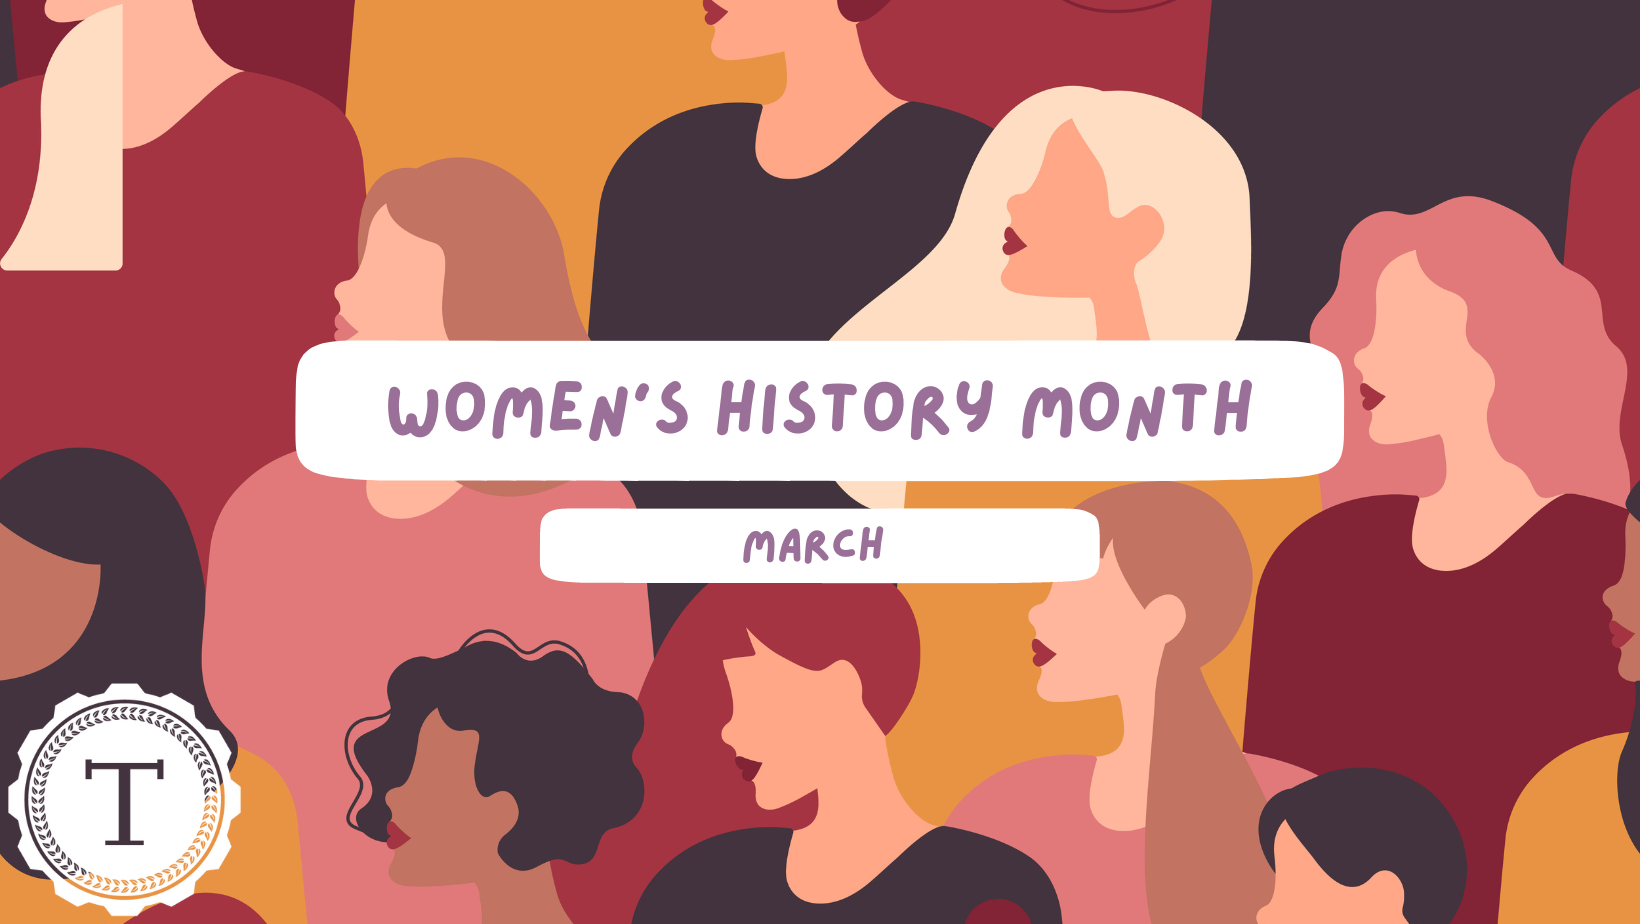 5 Tech Groundbreakers to Celebrate This Women’s History Month